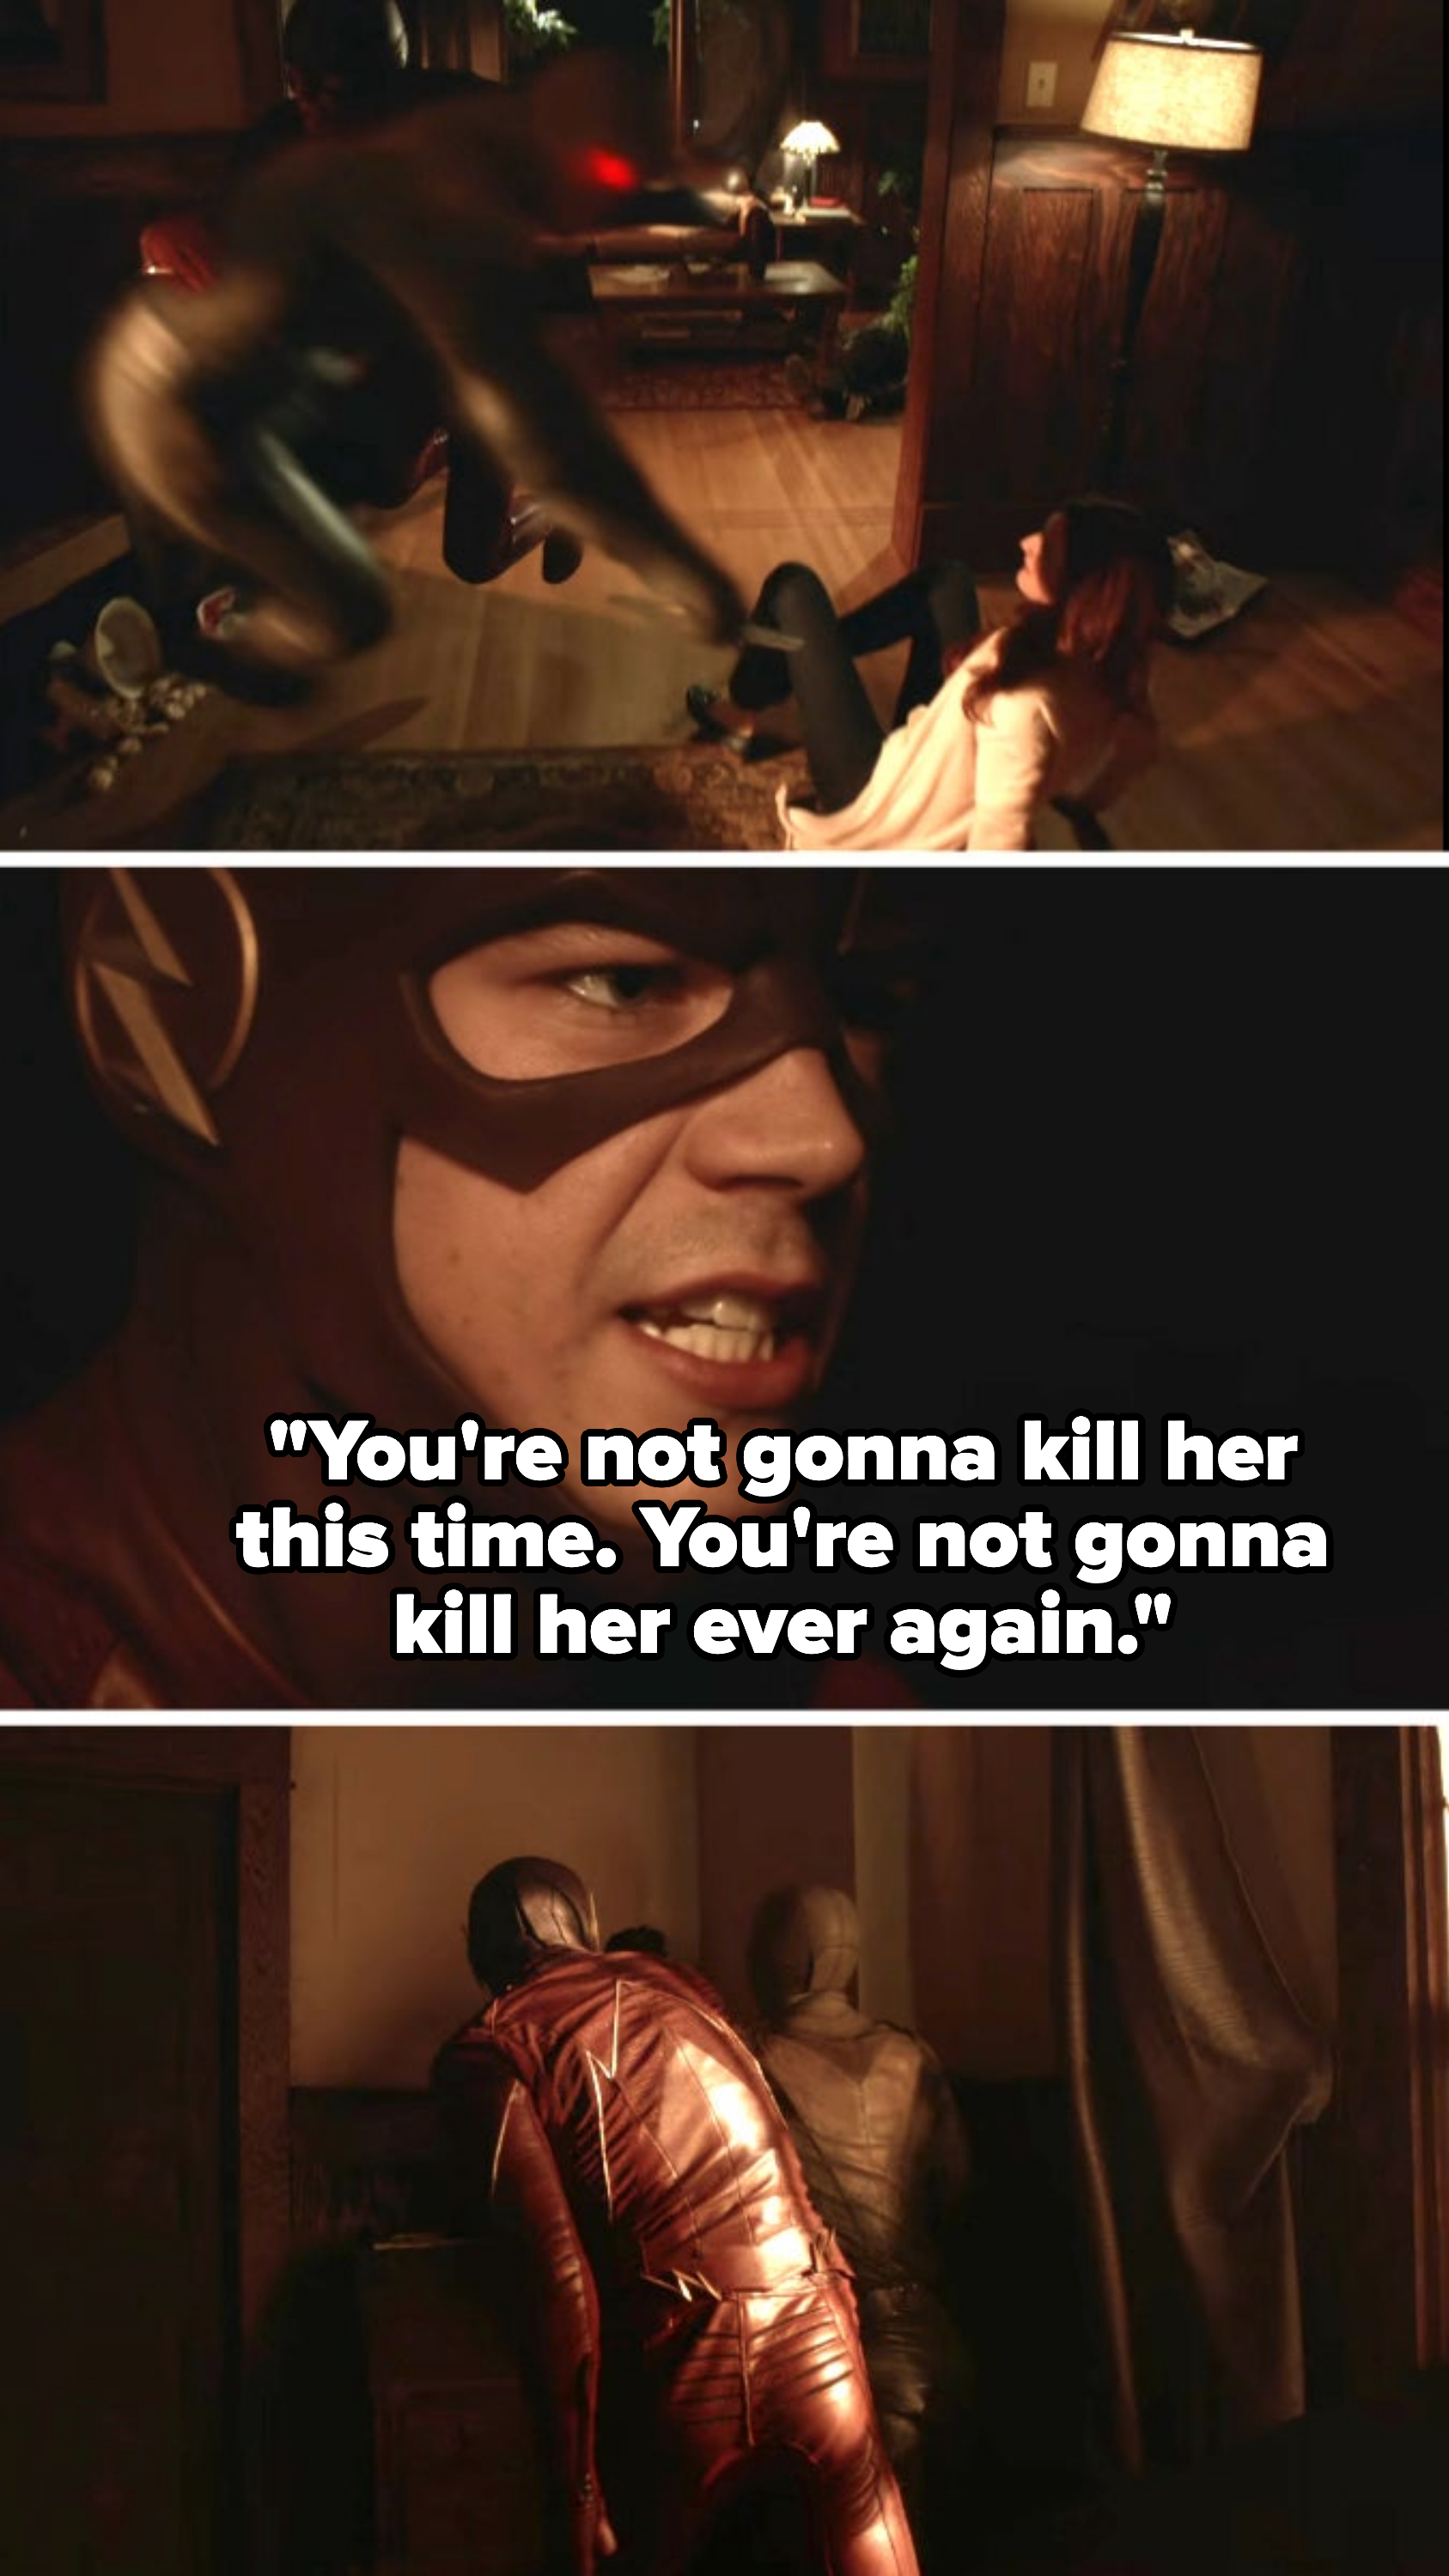 Barry says &quot;You&#x27;re not gonna kill her this time; you&#x27;re not gonna kill her ever again&quot;